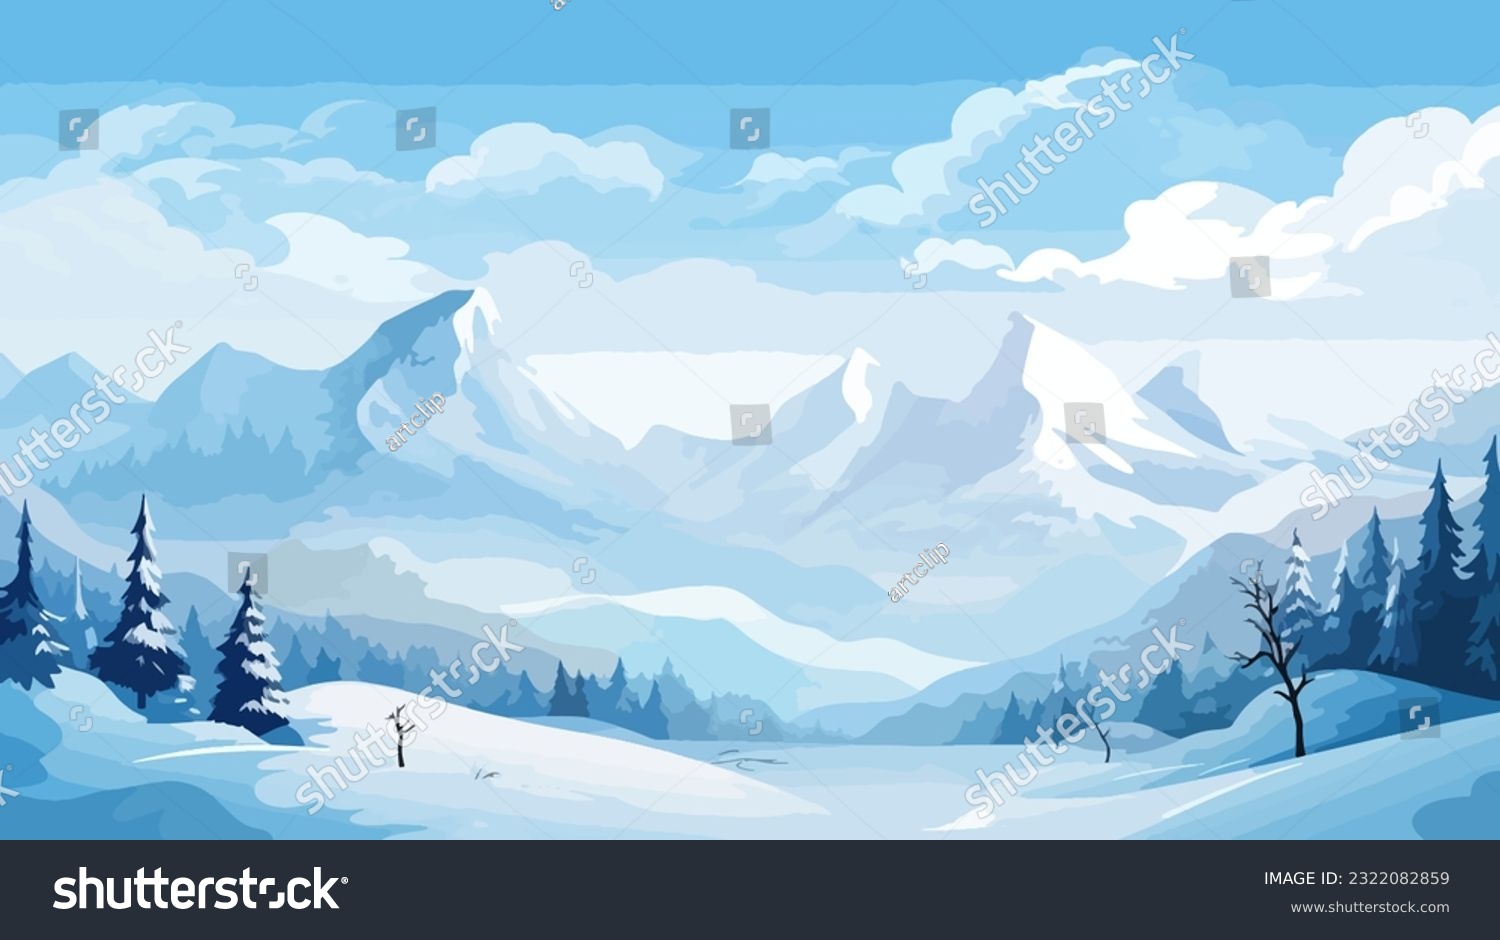 illustration of snowy mountains Realistic illustration of mountain landscape with hill and forest with coniferous trees, Alpine mountain range background, snow capped mountains vector background #2322082859